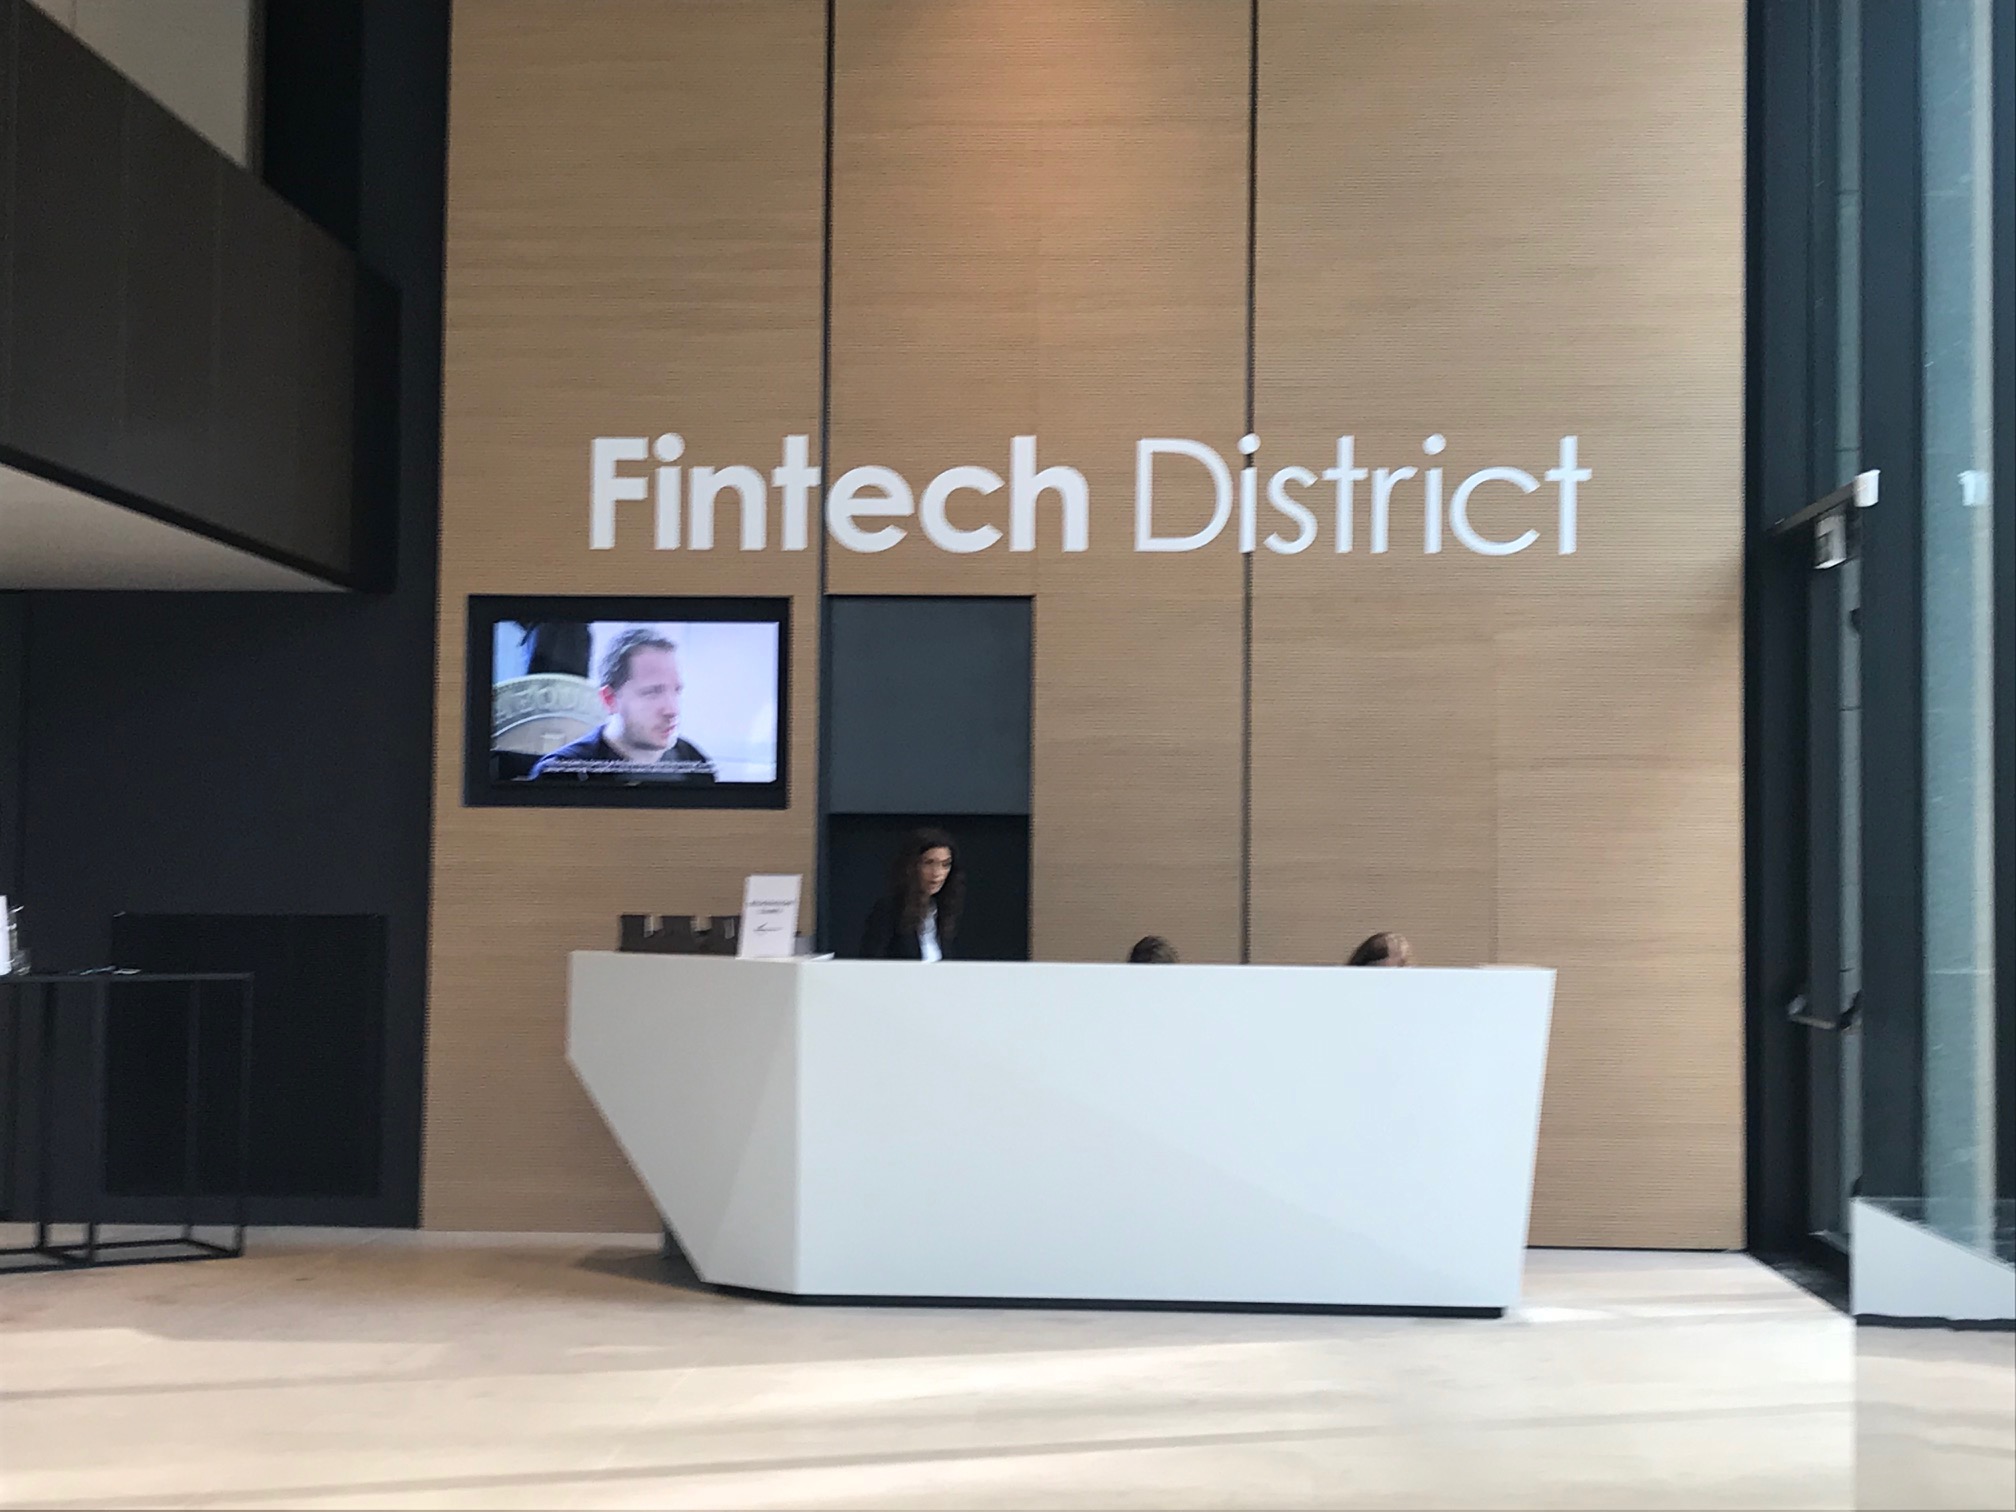 Open Innovation, anche CREDEM aderisce al Fintech District